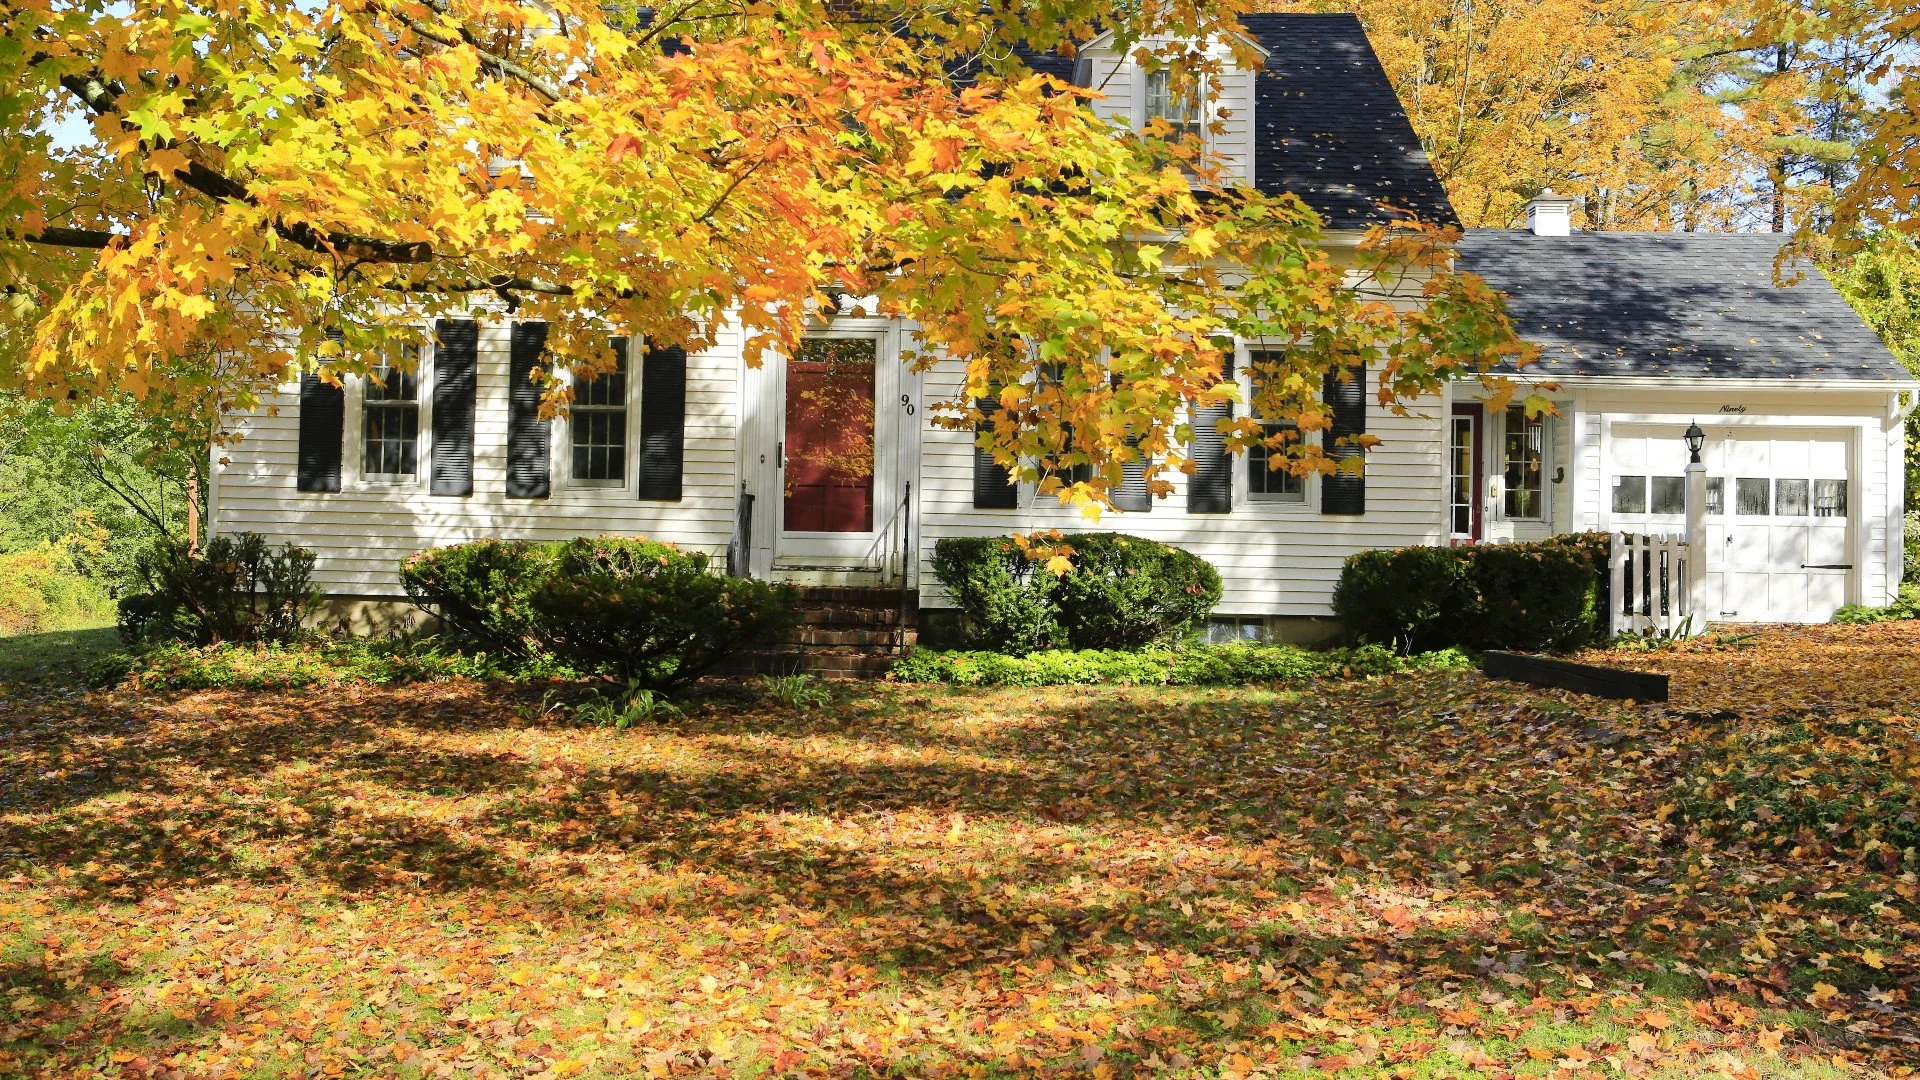 3 Ways You Can Clean up Leaves From Your Yard